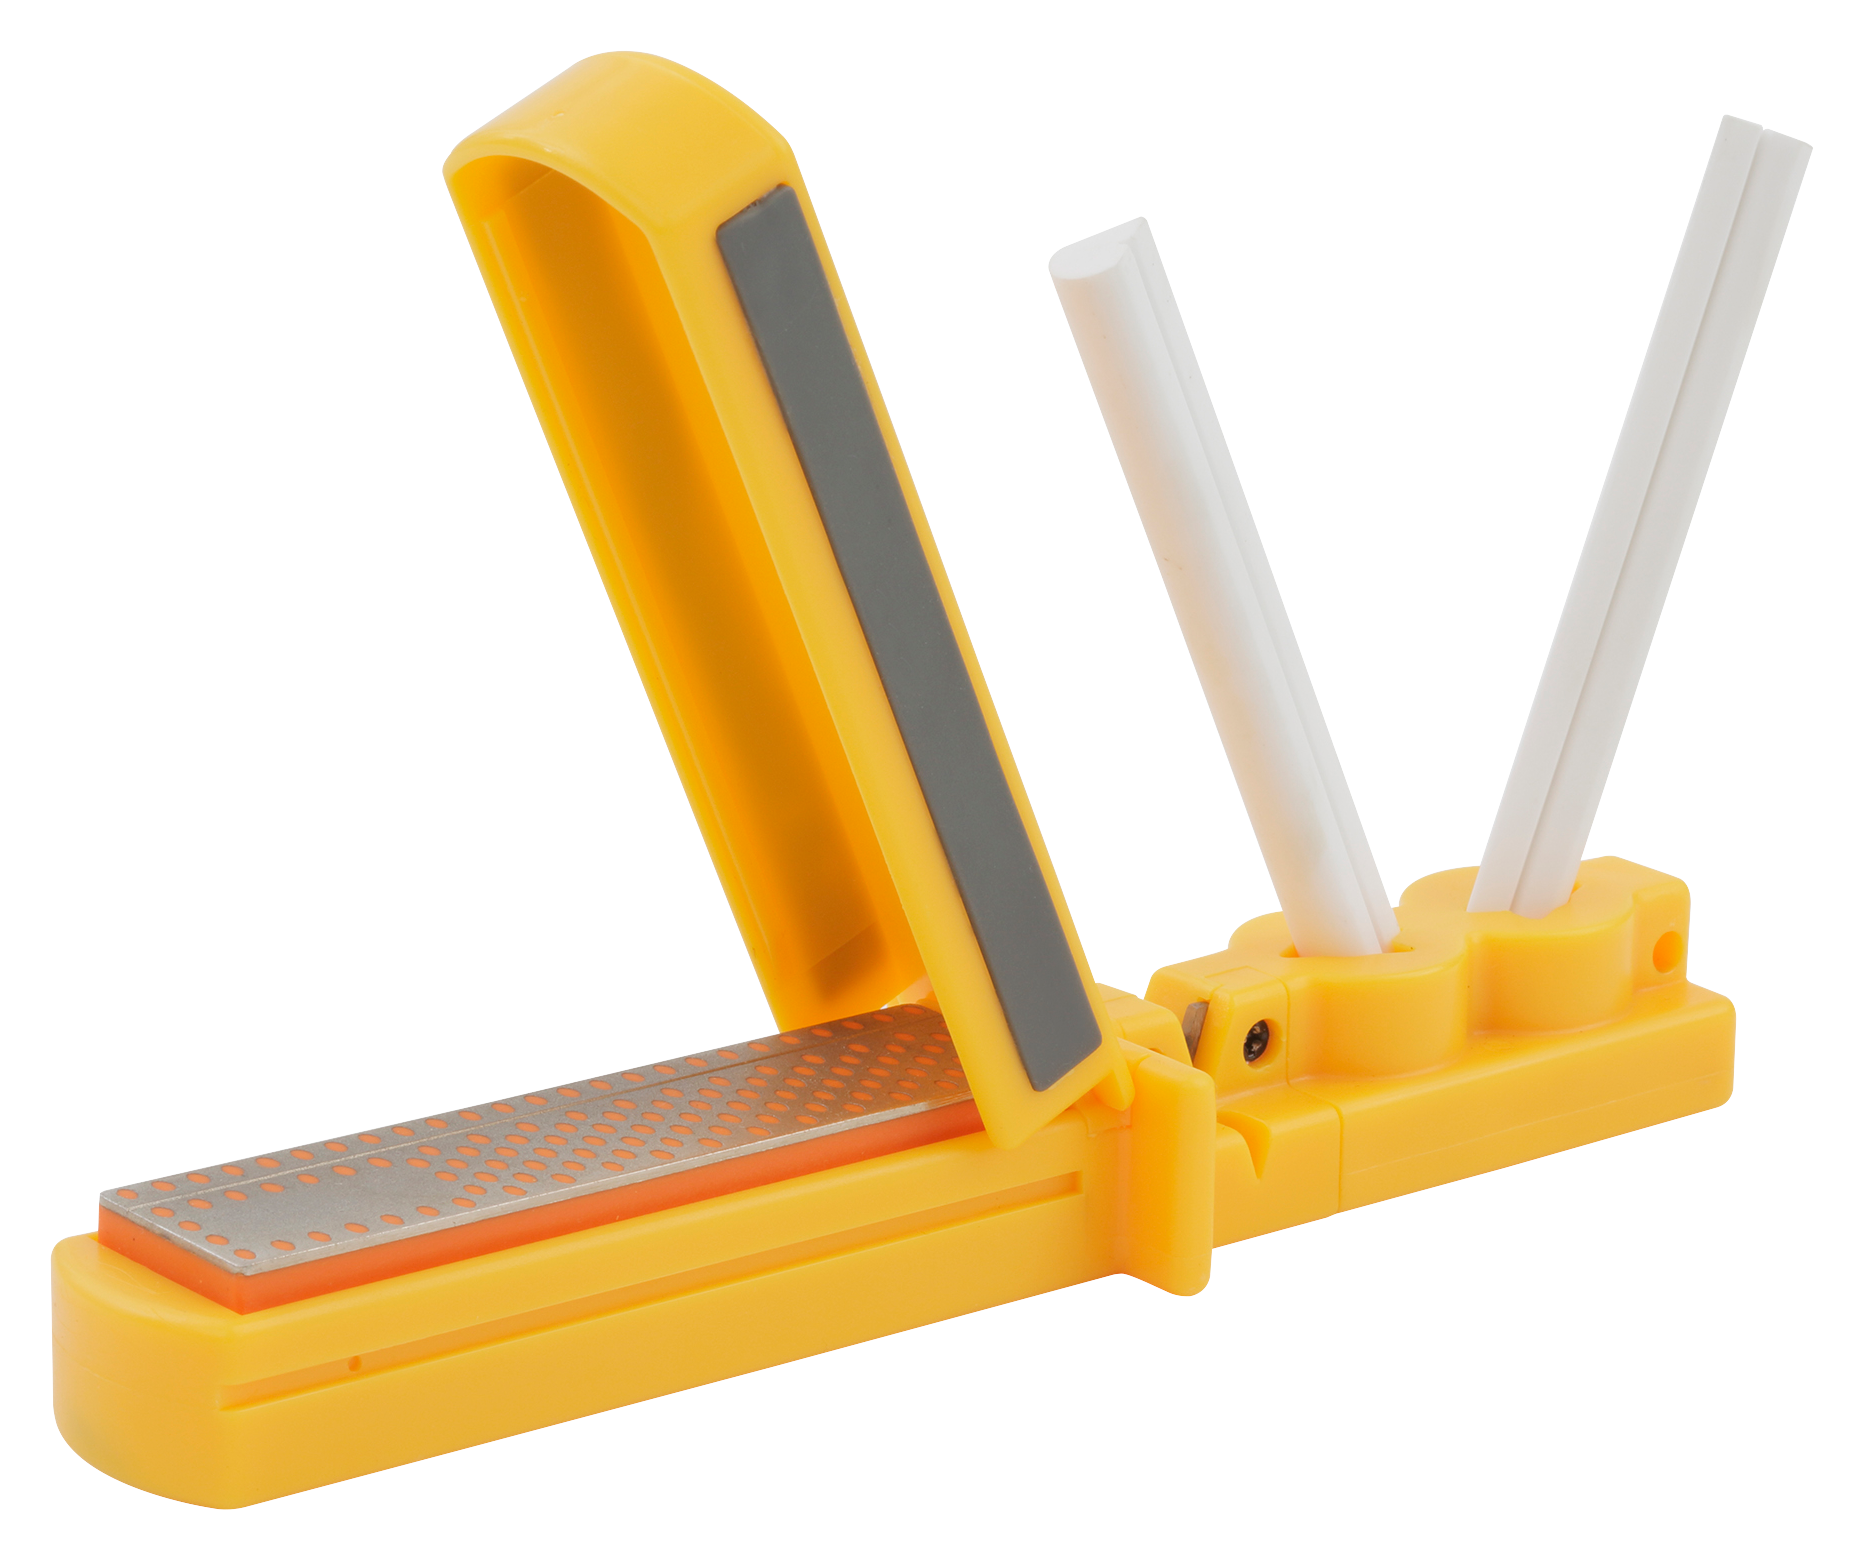 Smith s 3-in-1 Knife and Tool Sharpener